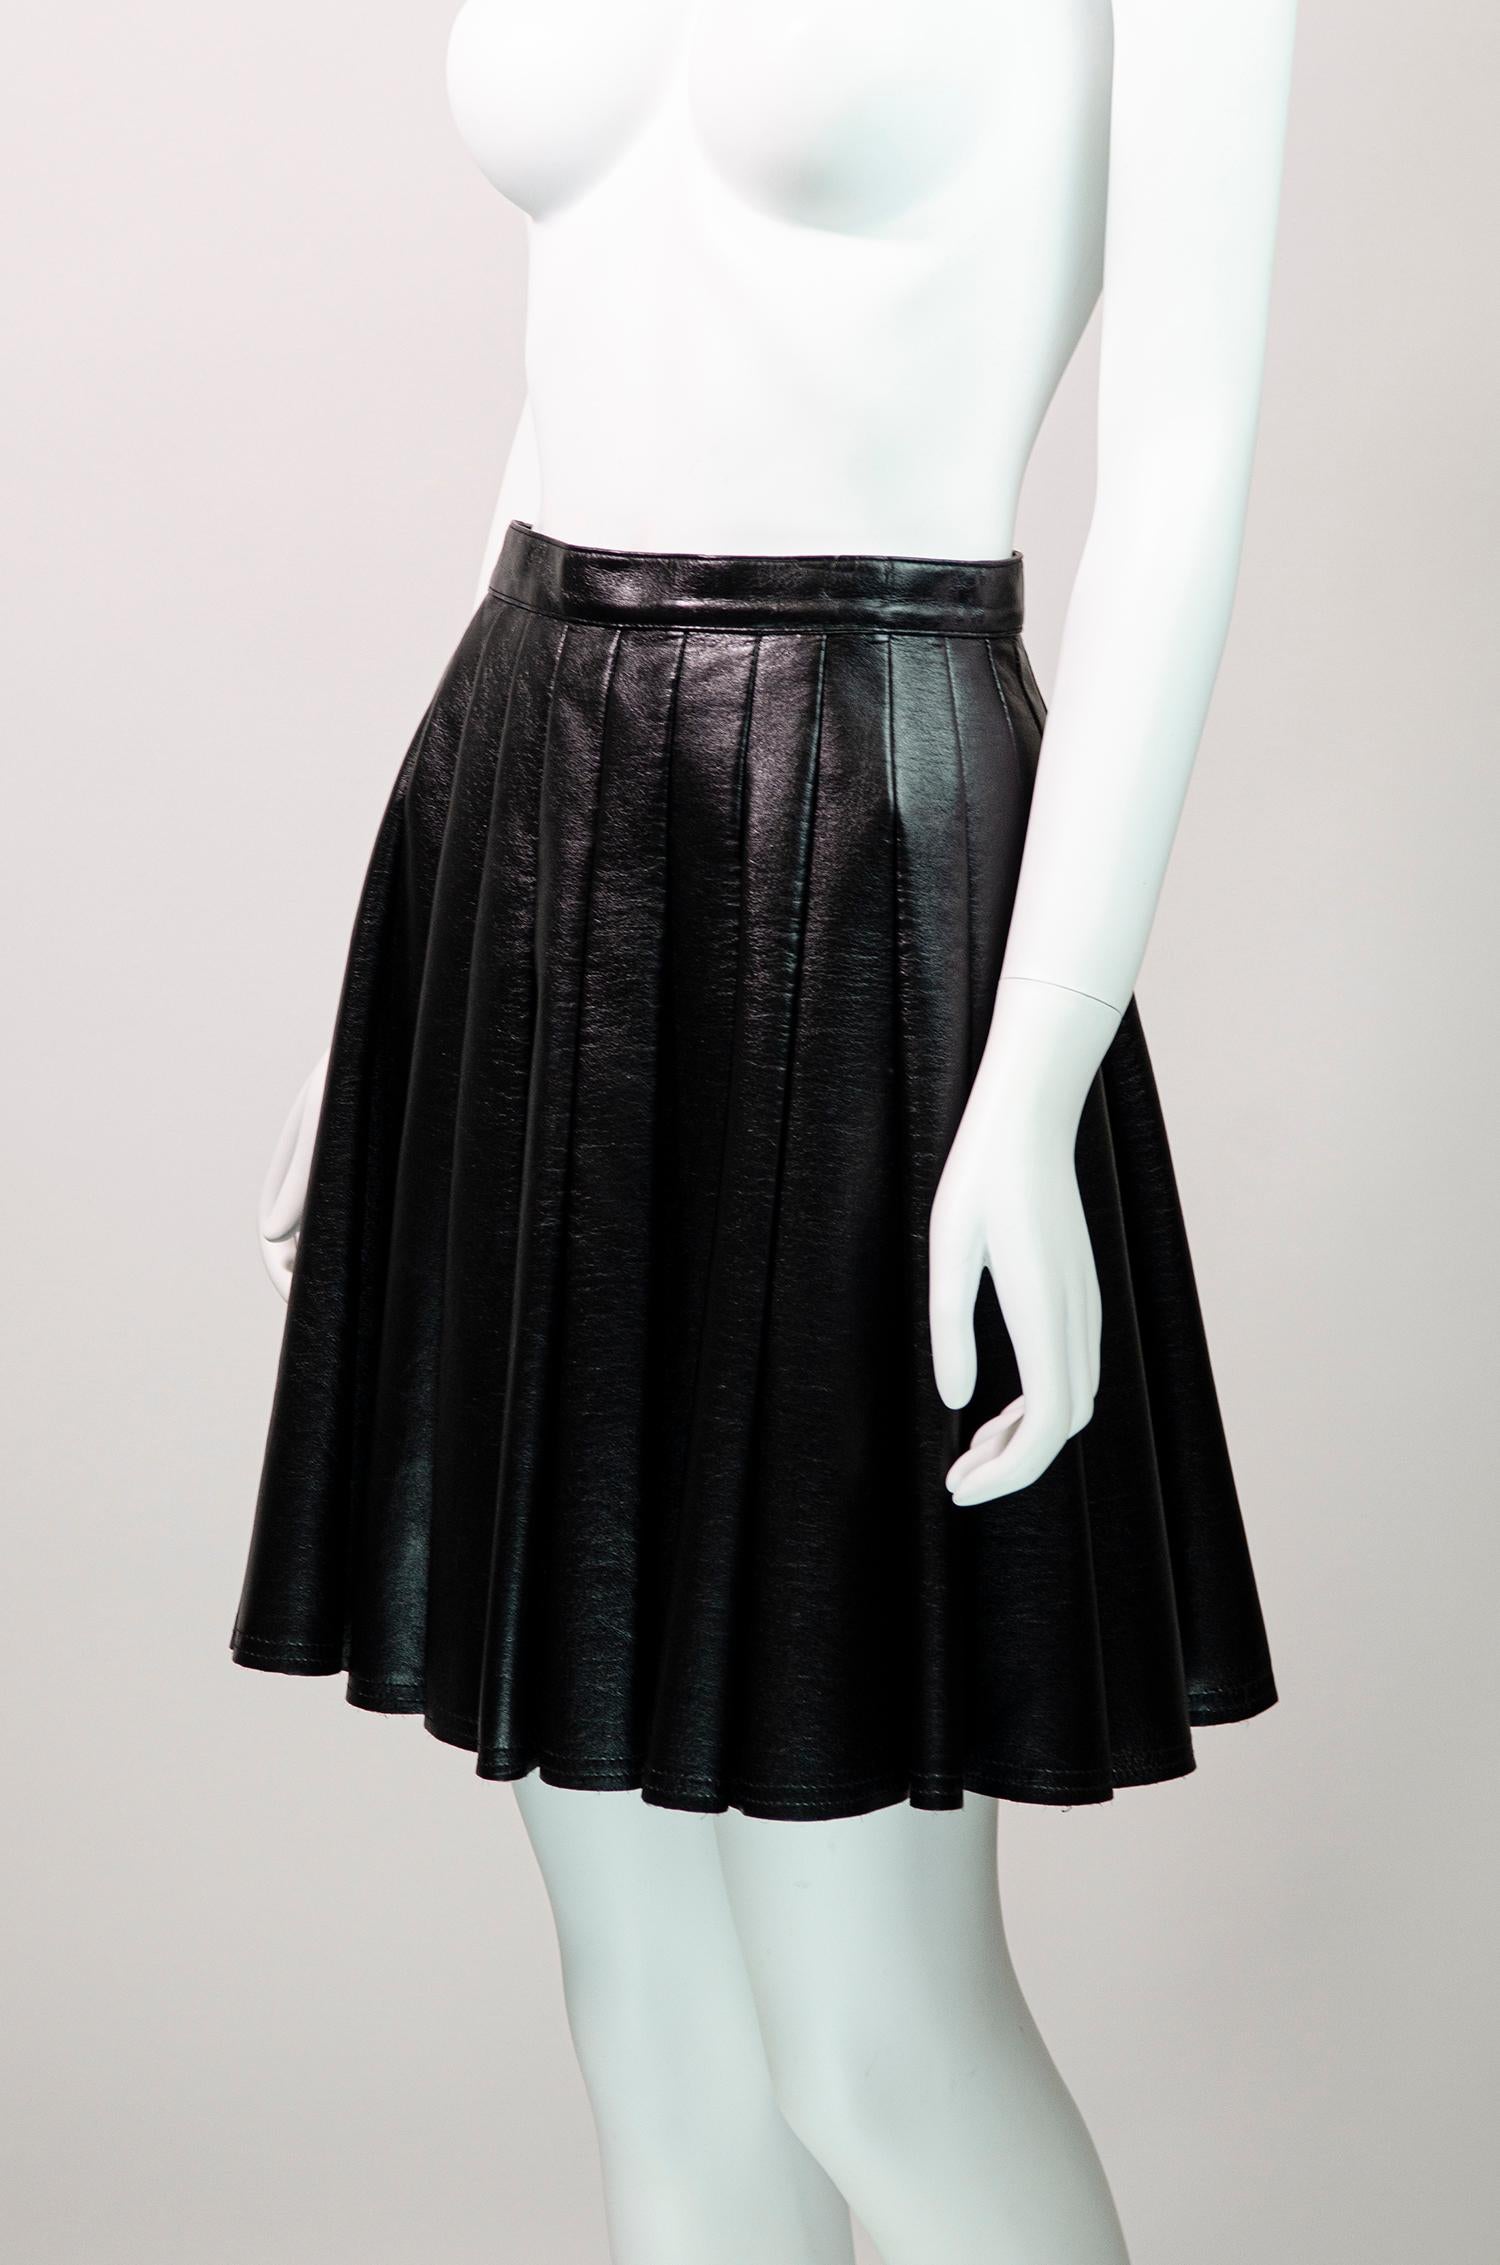 Amazing pleated black leather skirt by Japanese designer Junya Watanabe.

The luxurious leather skirt is made form a soft leather - it is fitted at the waistband and pleated at the body. The length falls above the knee . It closes at the back with a